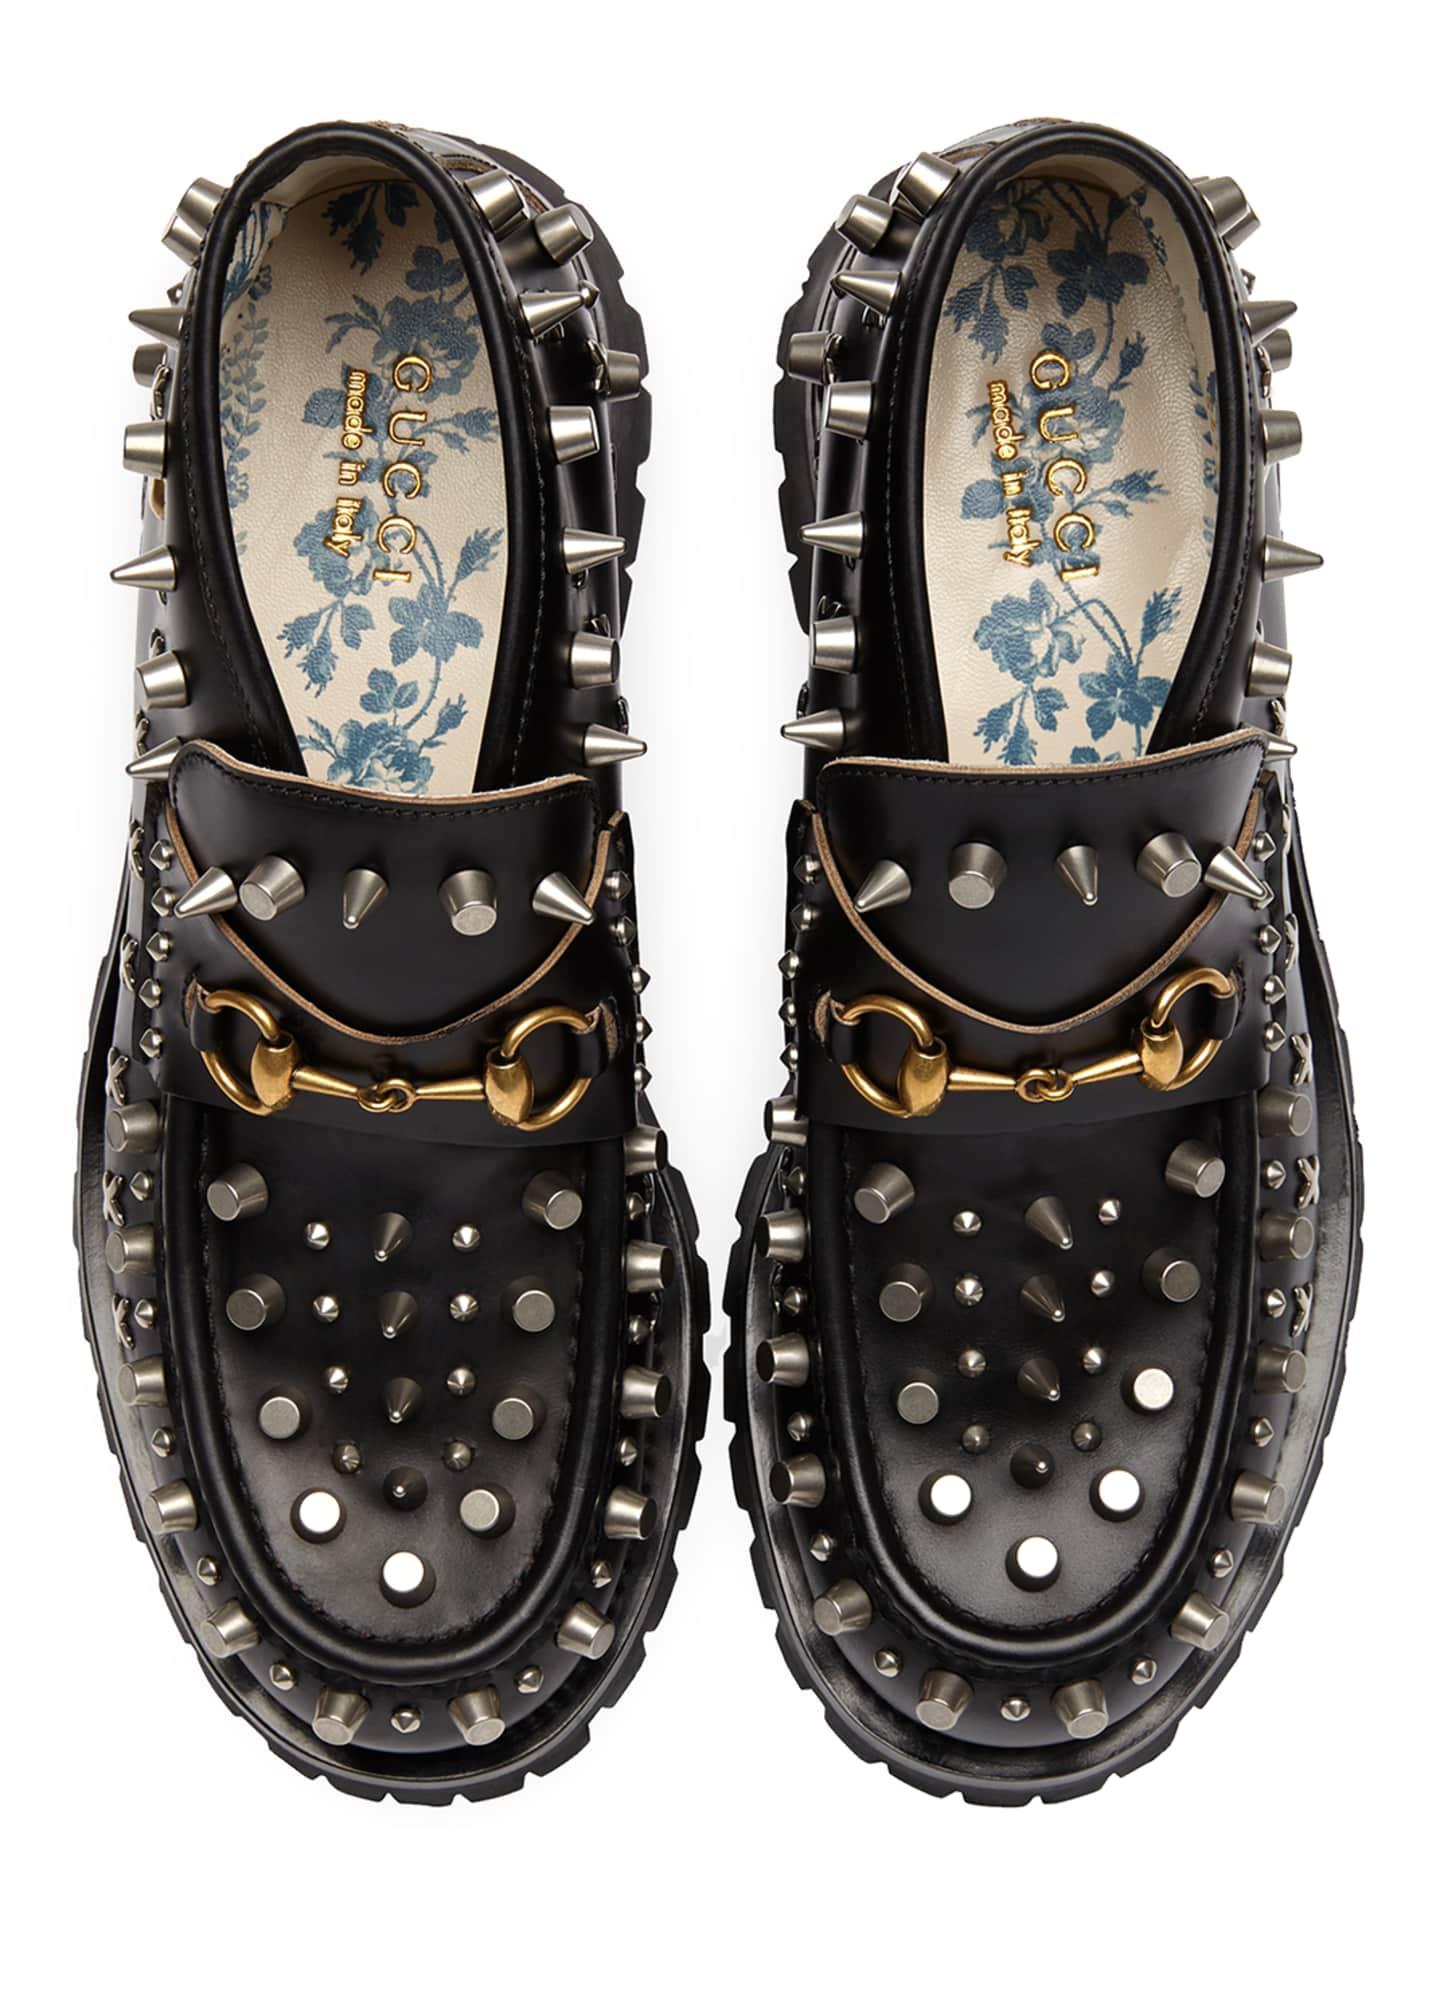 Gucci Men's Studded Leather Ankle Boots 